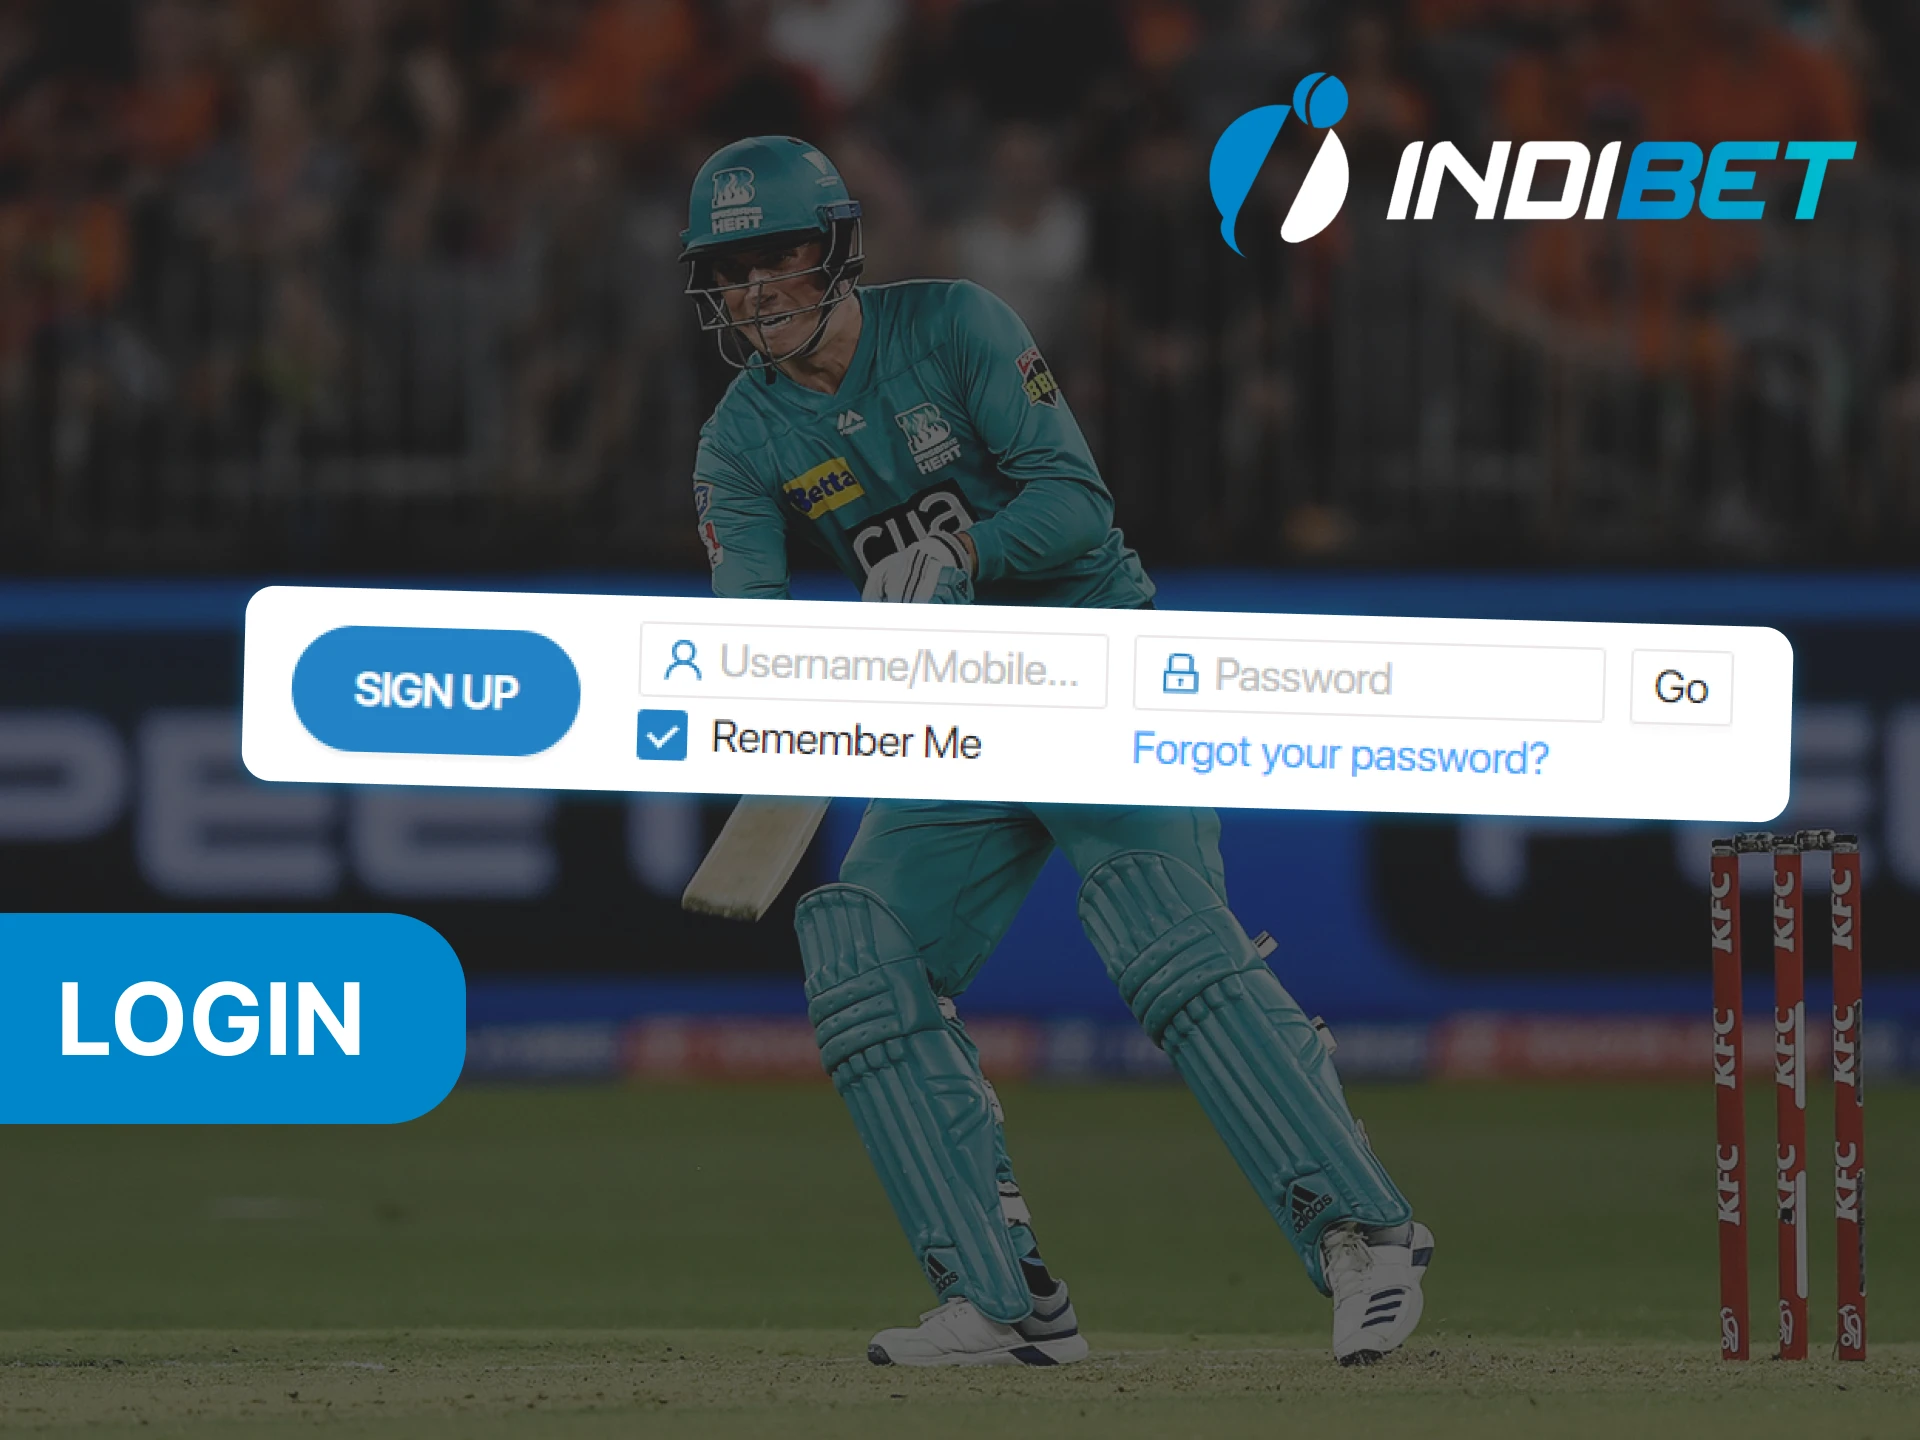 To log into your Indibet account, enter your username and password into the login form.